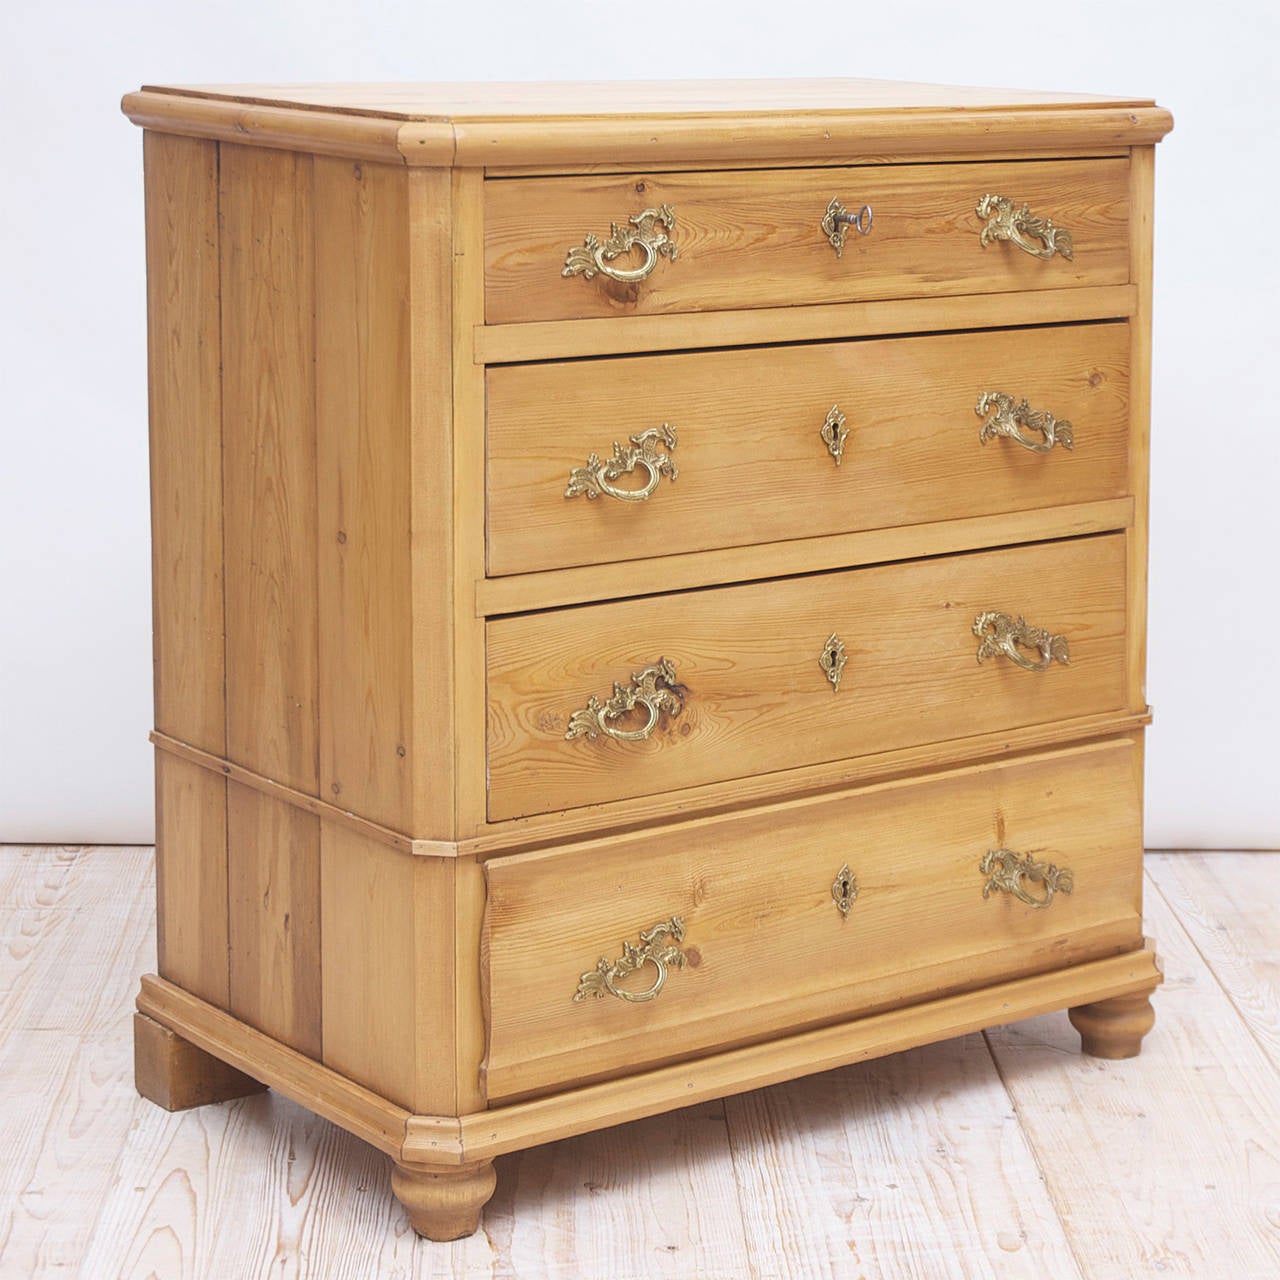 A chest with four drawers in pine with bronze doré pulls and keyplates and resting on turned feet, Sweden, circa 1850. Offers working locks and one key.
All of our pine can be painted upon request.

measures: 35 1/2" wide x 19 1/4"